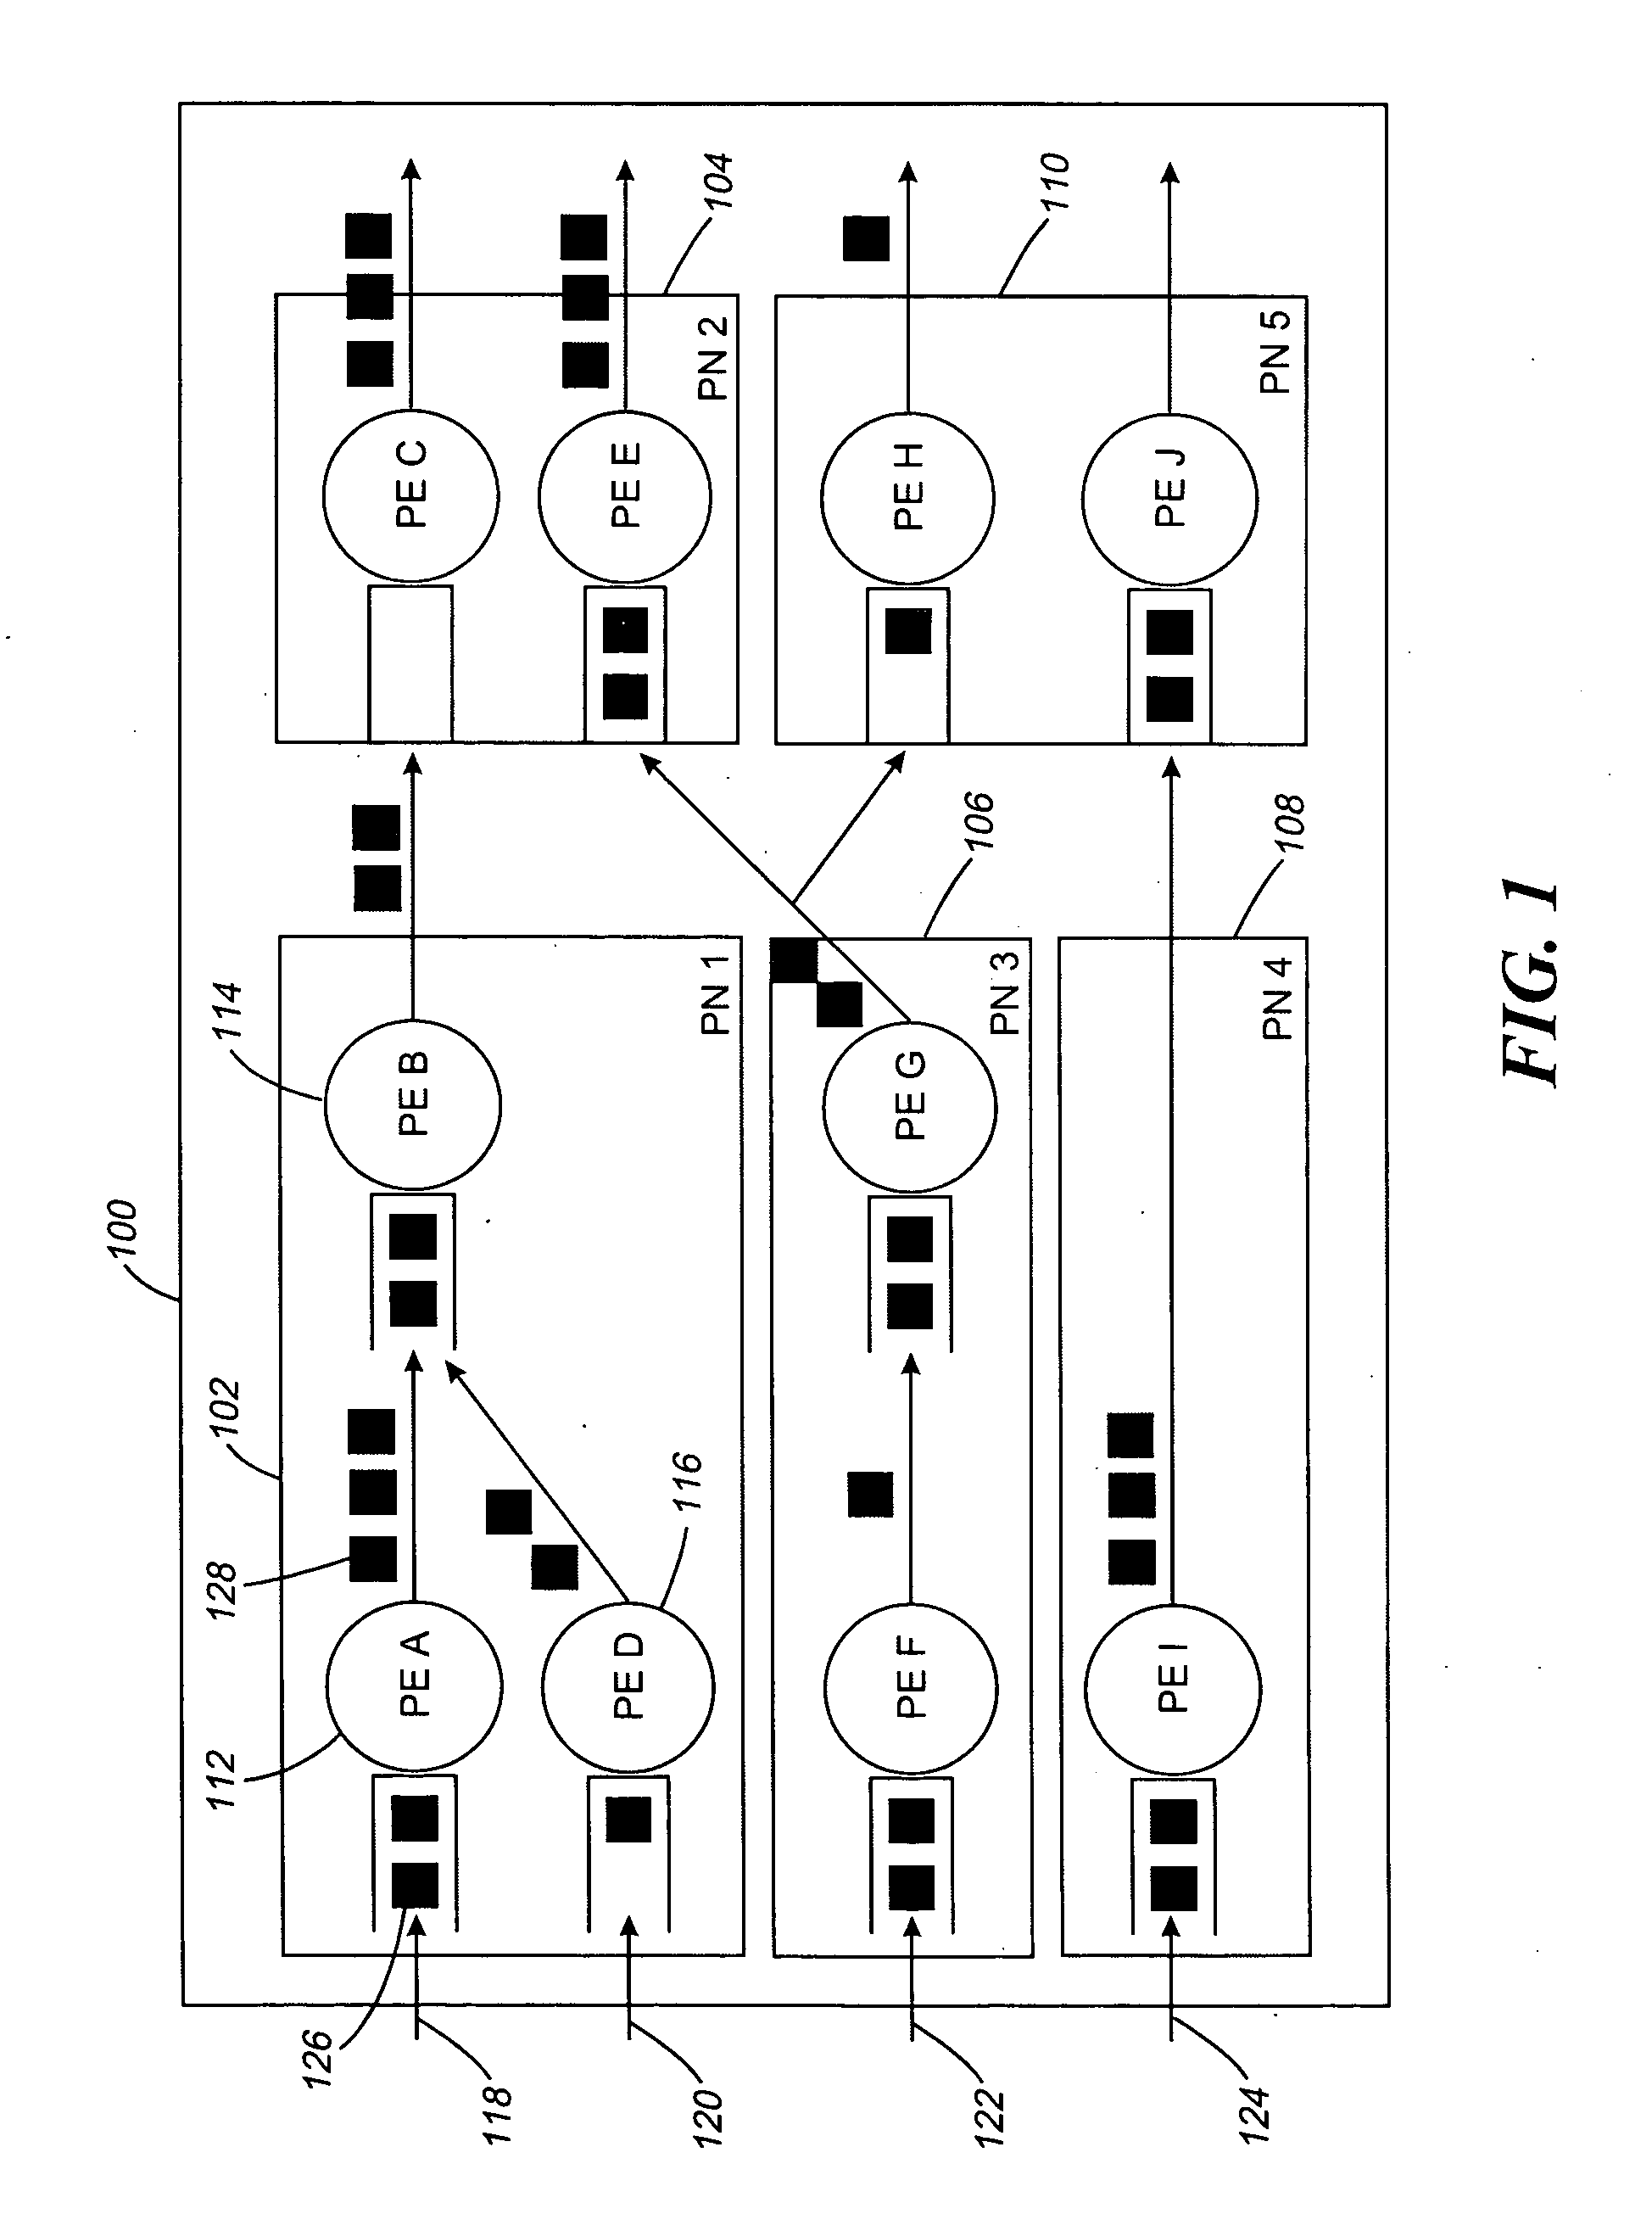 Maximal flow scheduling for a stream processing system